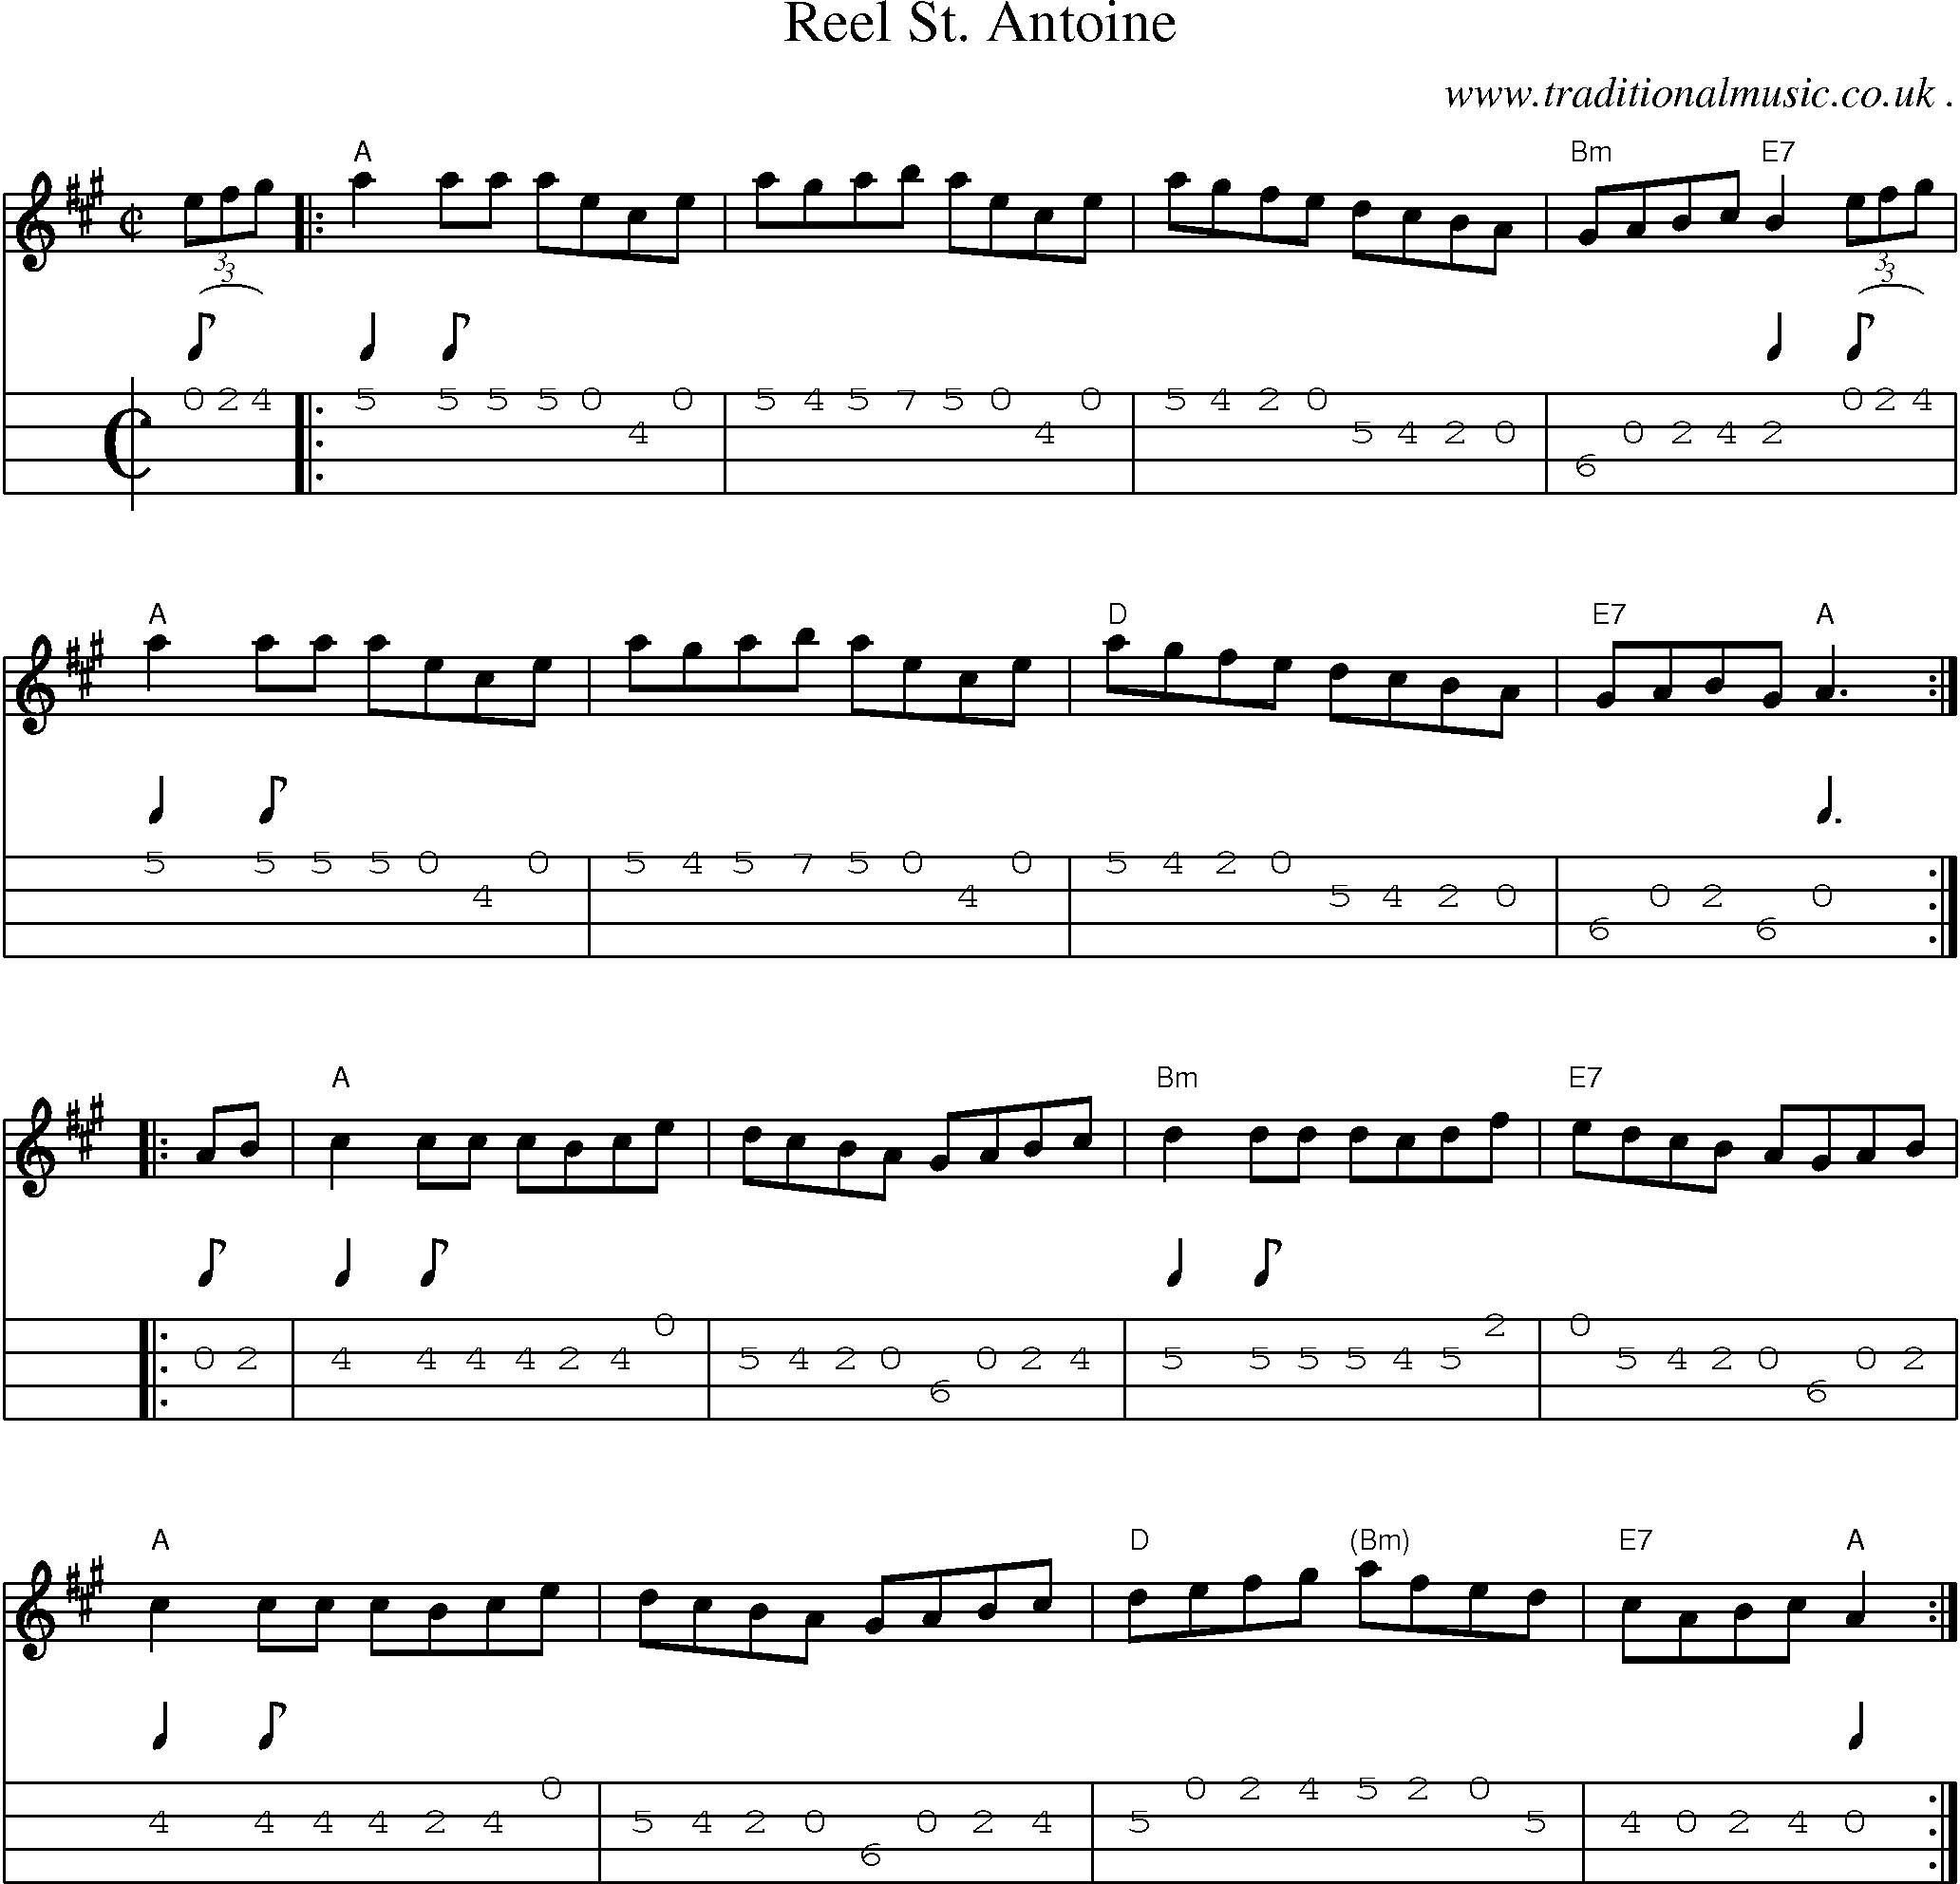 Music Score and Guitar Tabs for Reel St Antoine